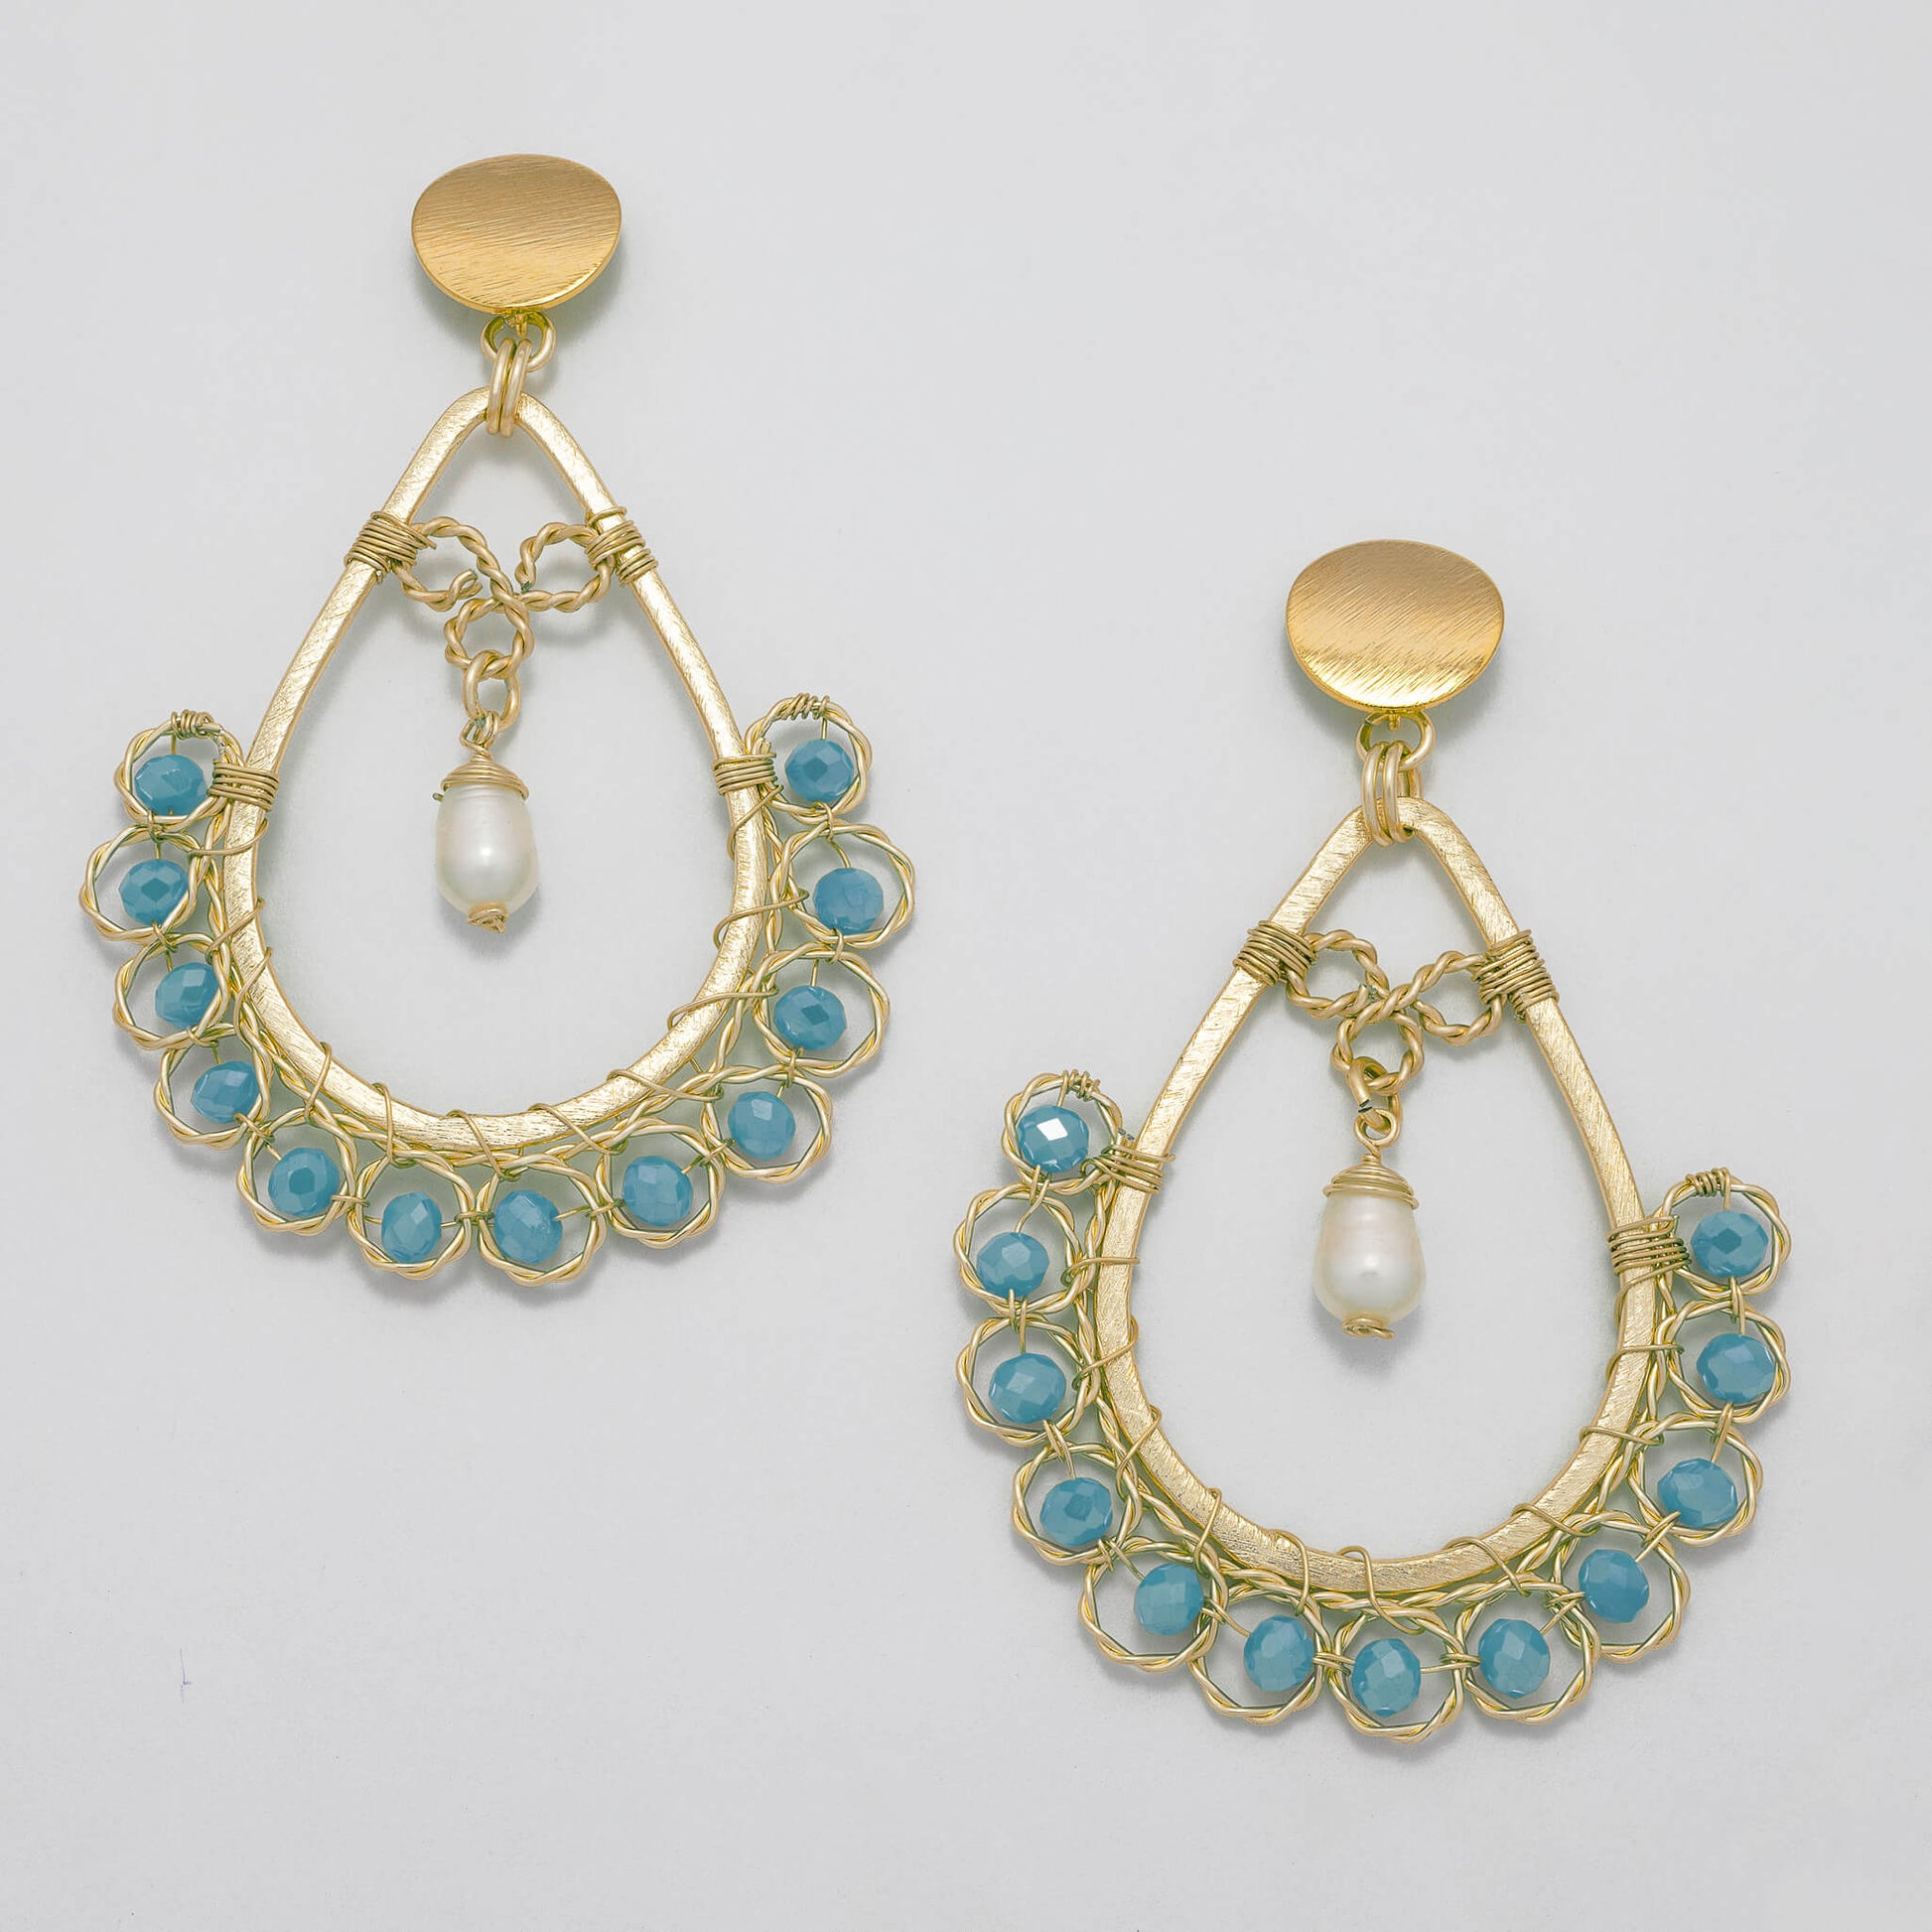 Amara I Earrings are 3 inches long. Gold teardrop Earrings. Gold, Light Blue, and White earrings. Handmade with Faceted Crystal beads and freshwater pearls. Wire Wrapped Earrings.